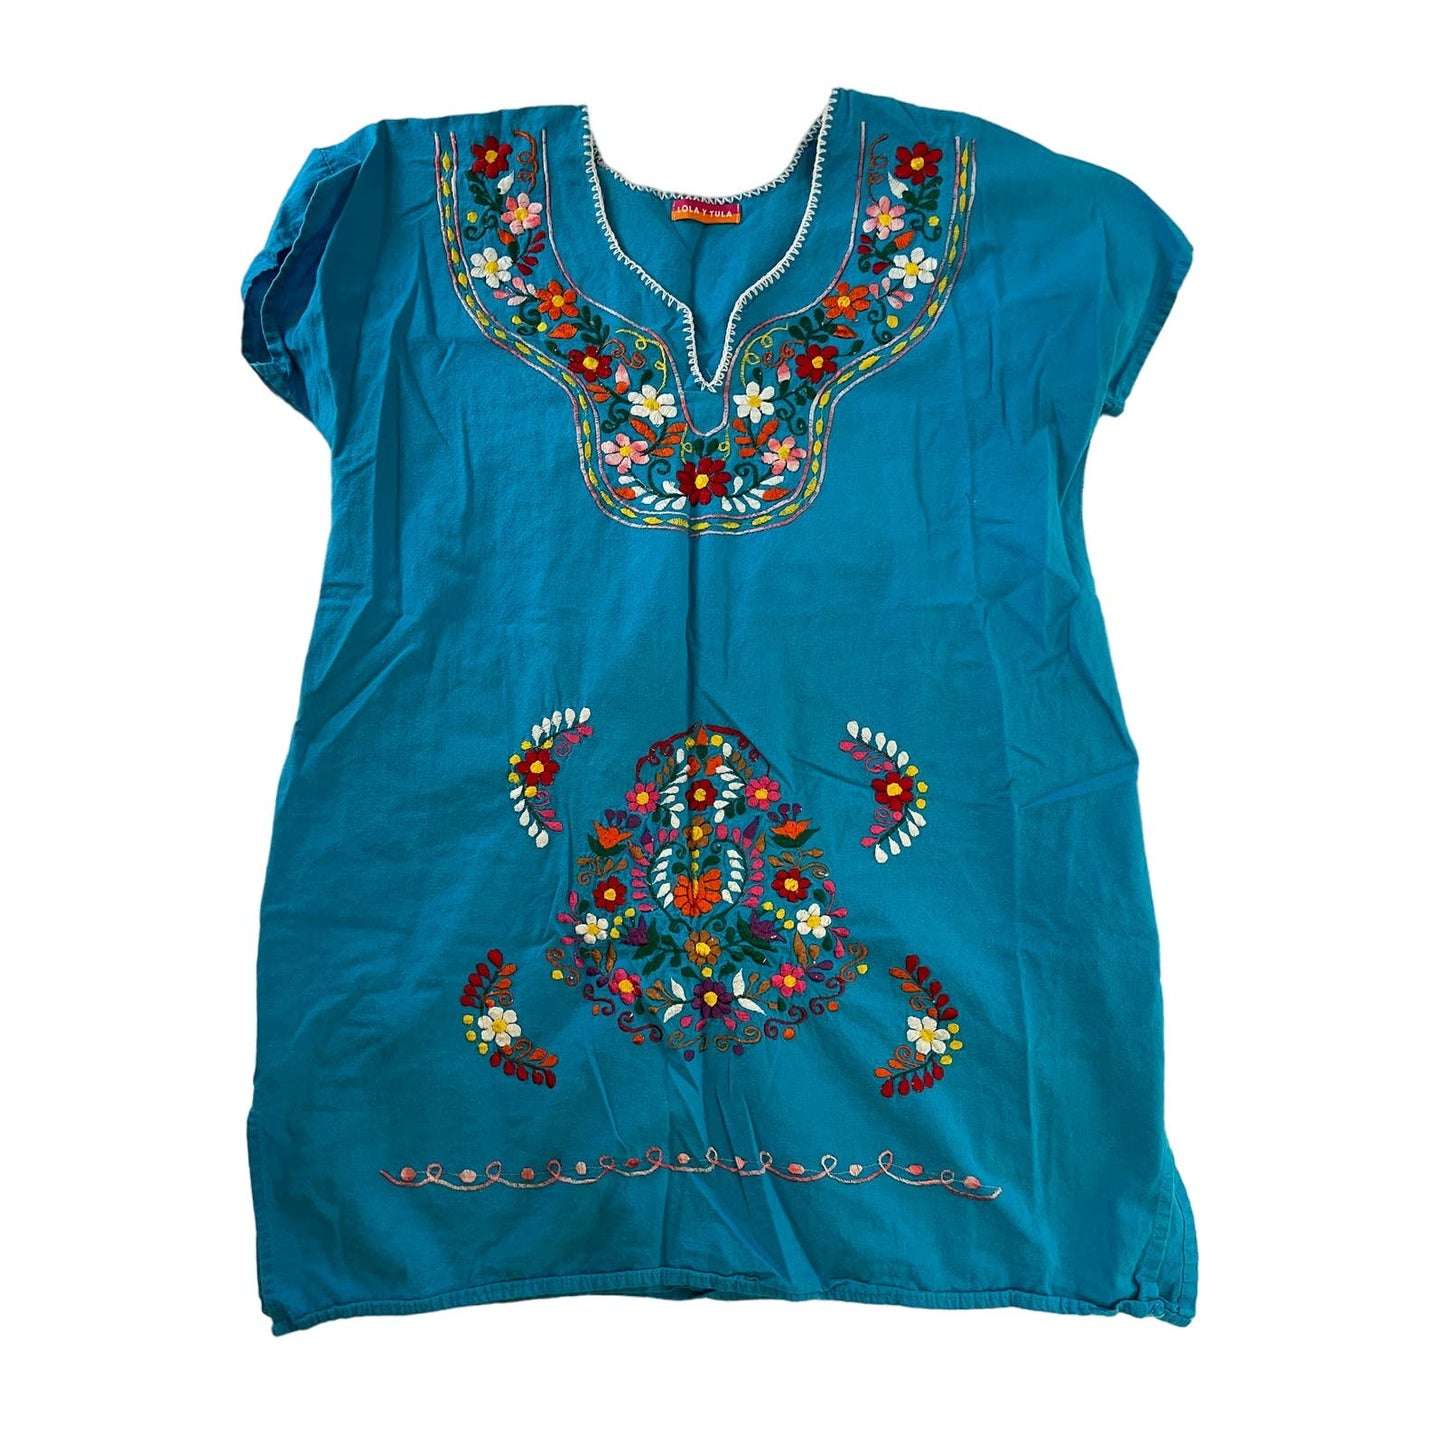 Lola Y Tula Women's Blouse Blue Hand Embroidered in Mexico Med / Large $82 MSRP